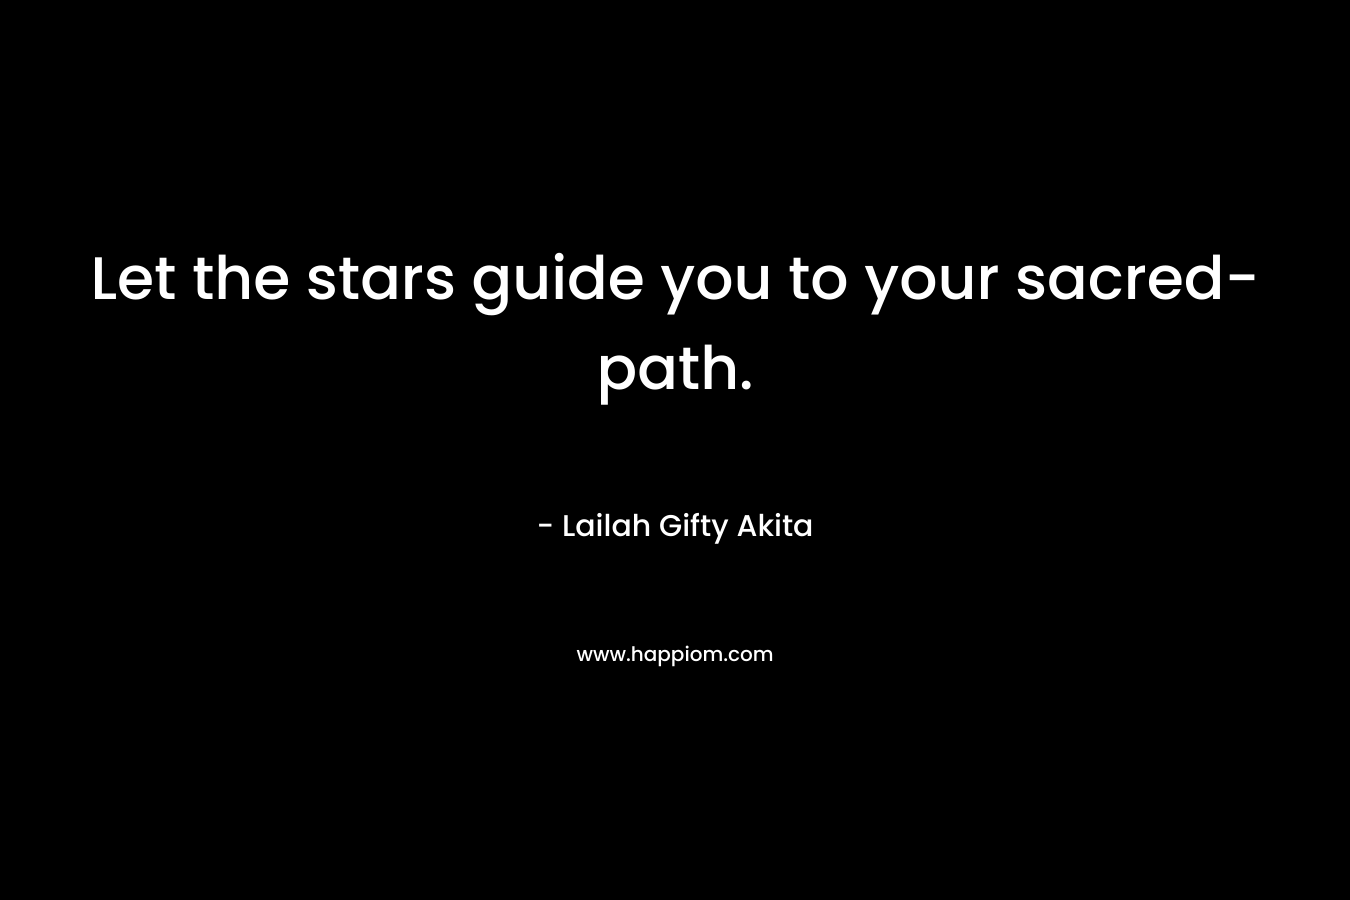 Let the stars guide you to your sacred-path.